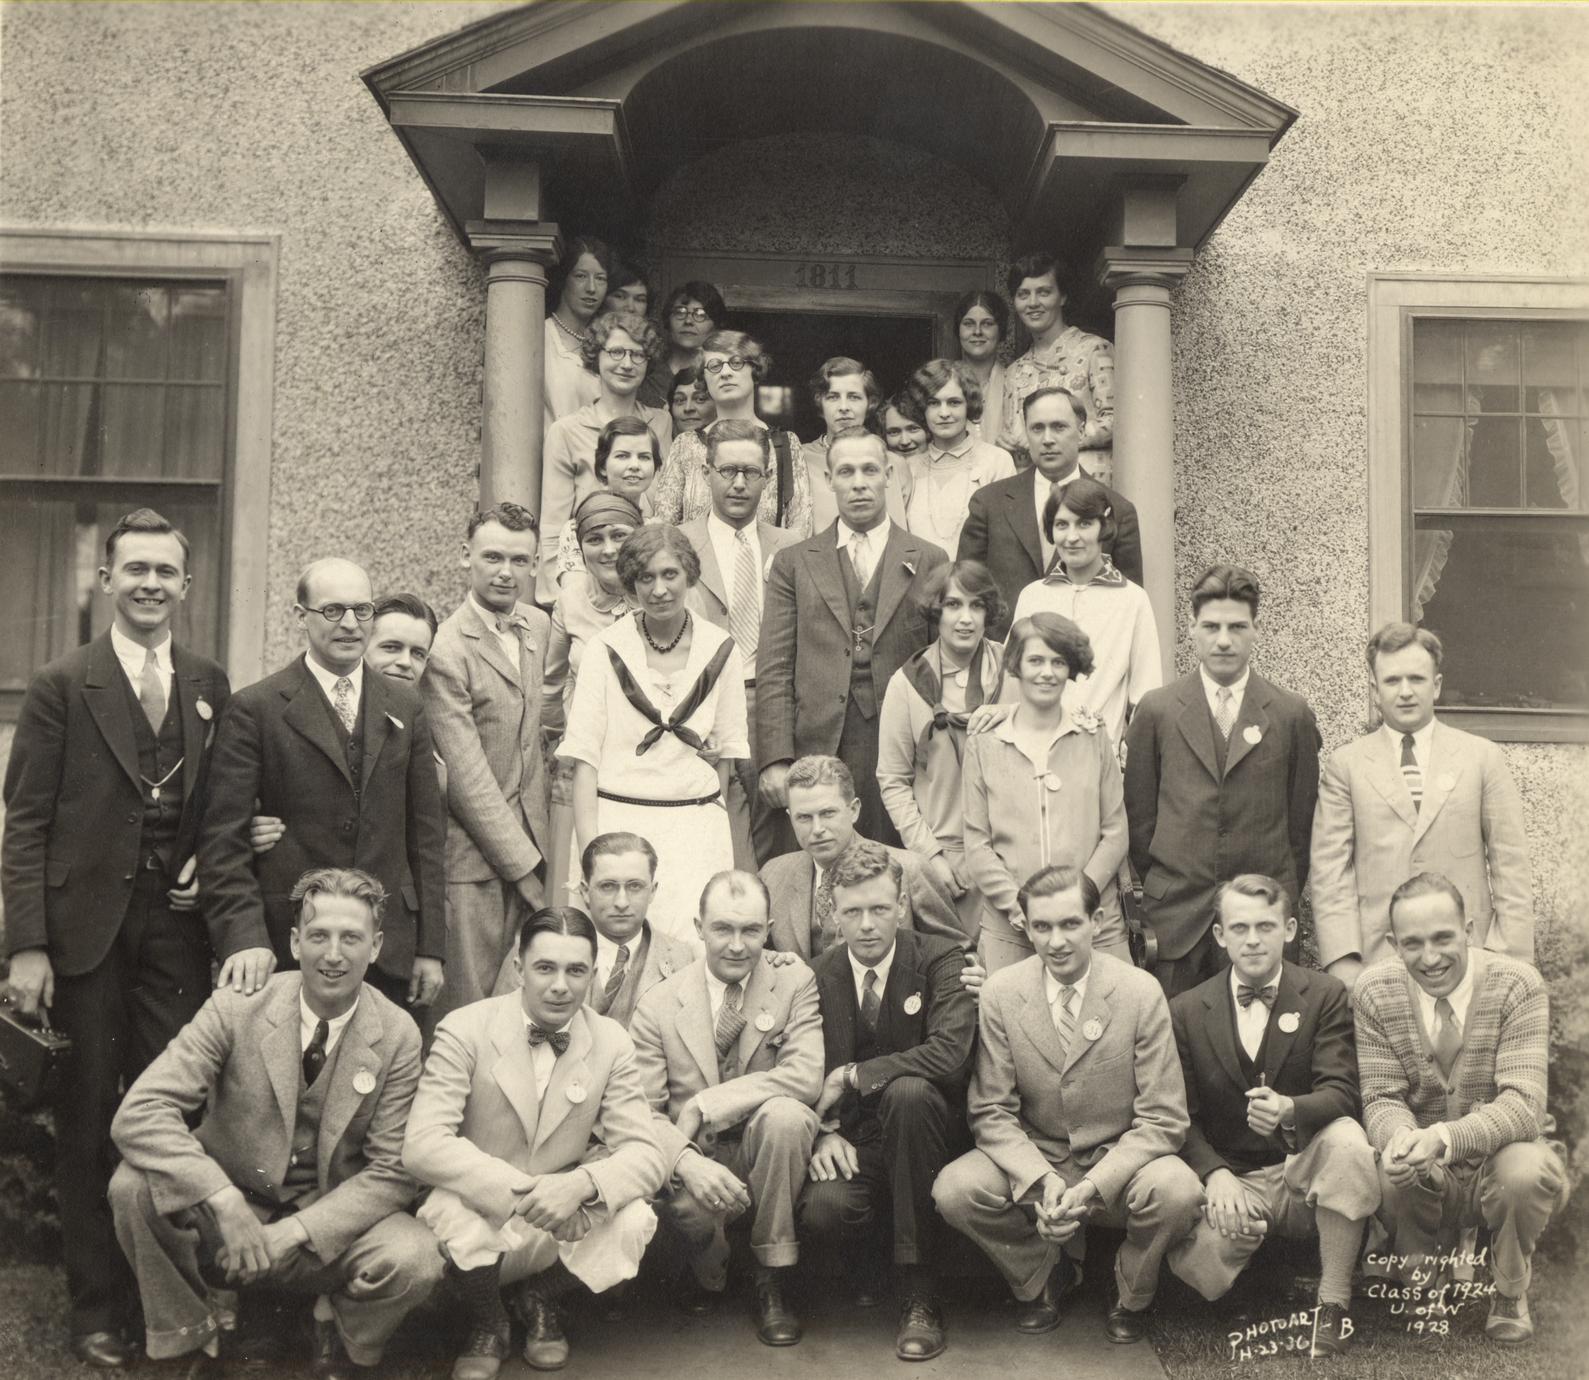 Charles Lindbergh at Class of 1924 reunion